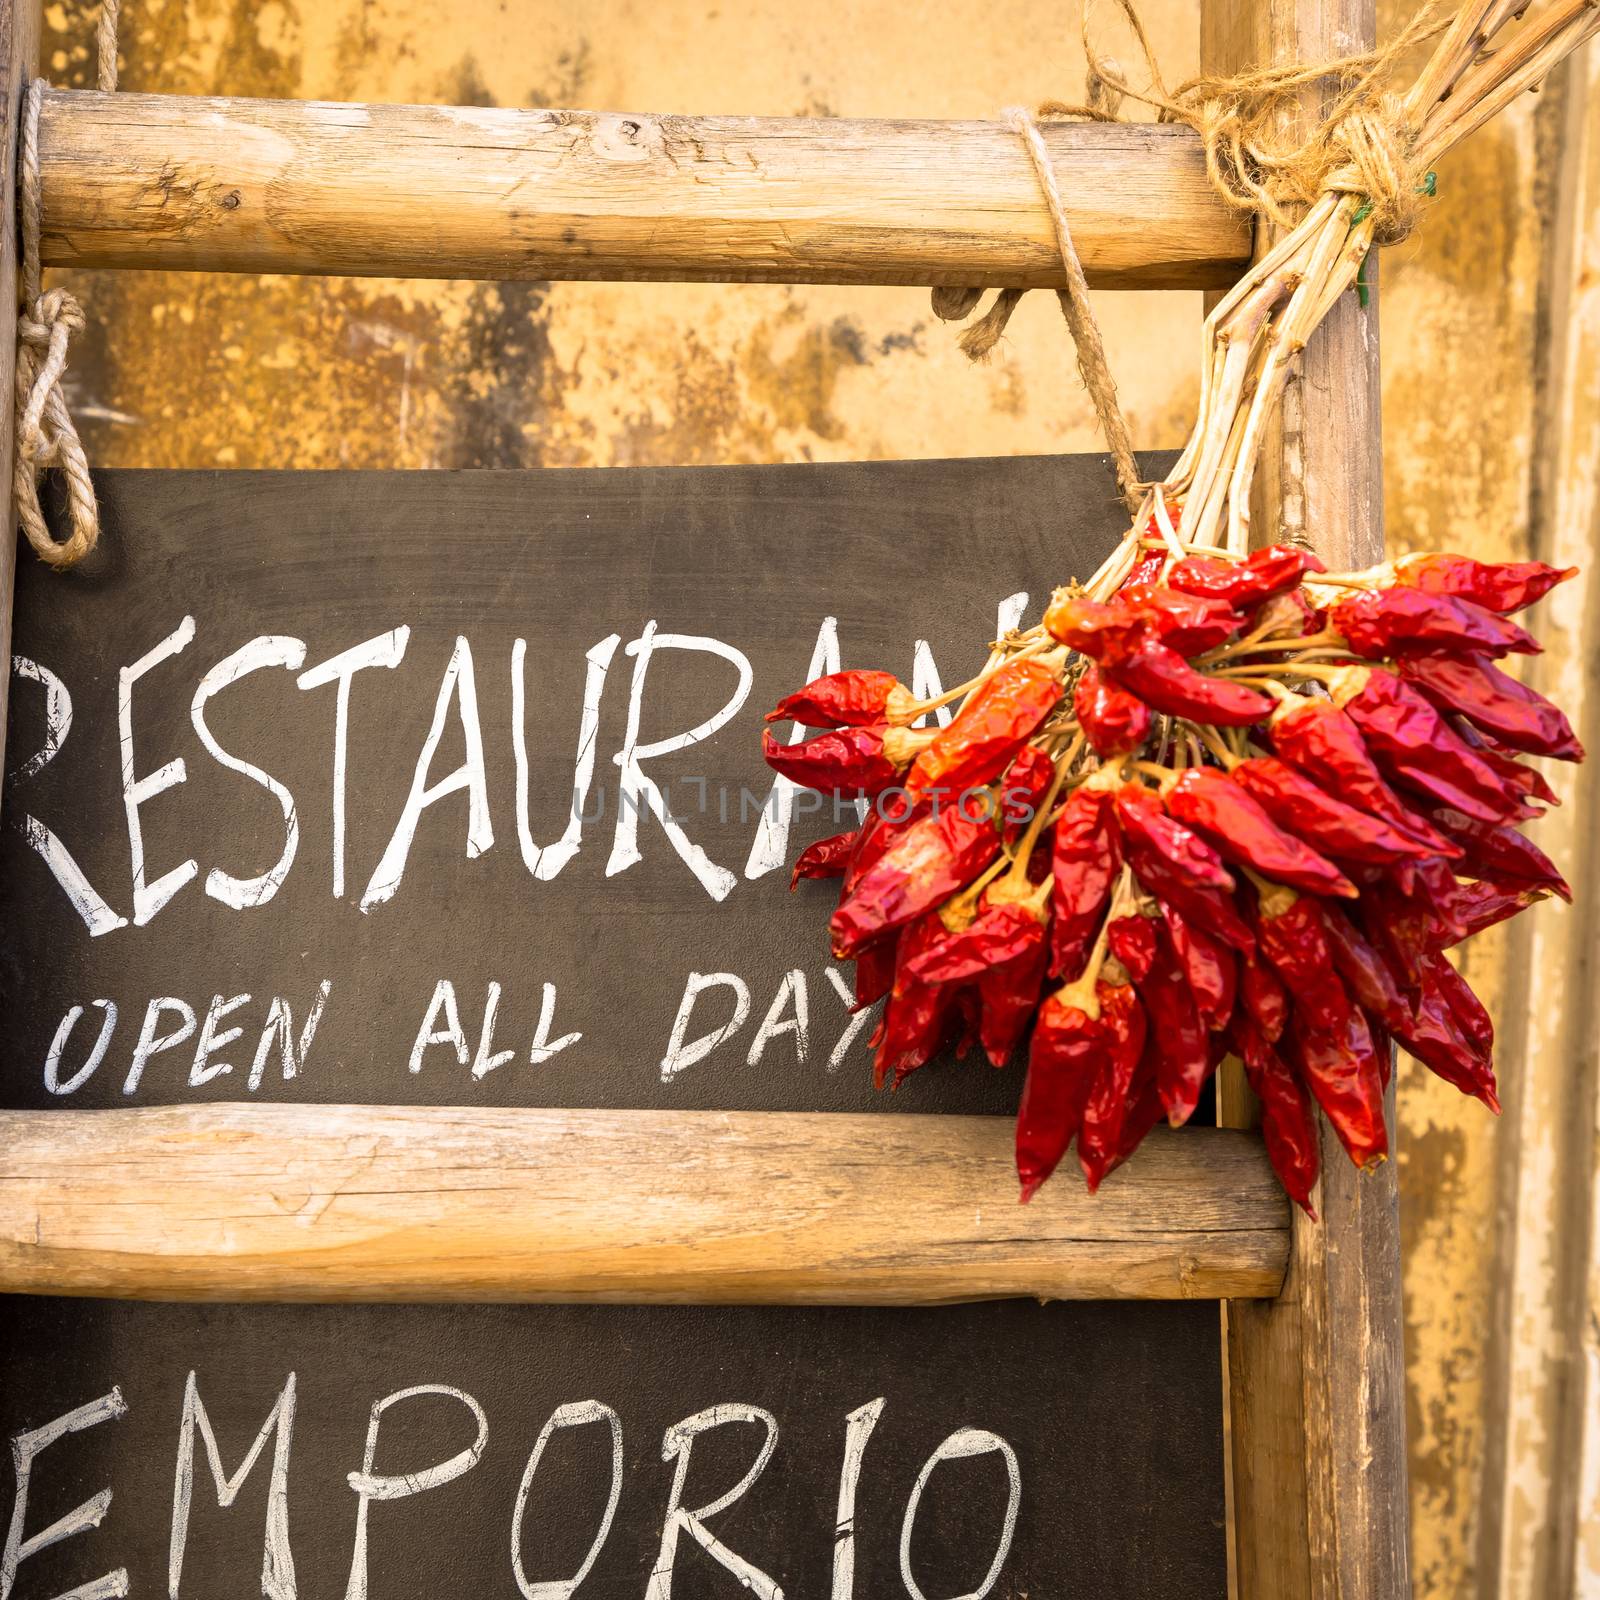 Italy, Puglia Region. Traditional restaurant blackboard with red peppers.